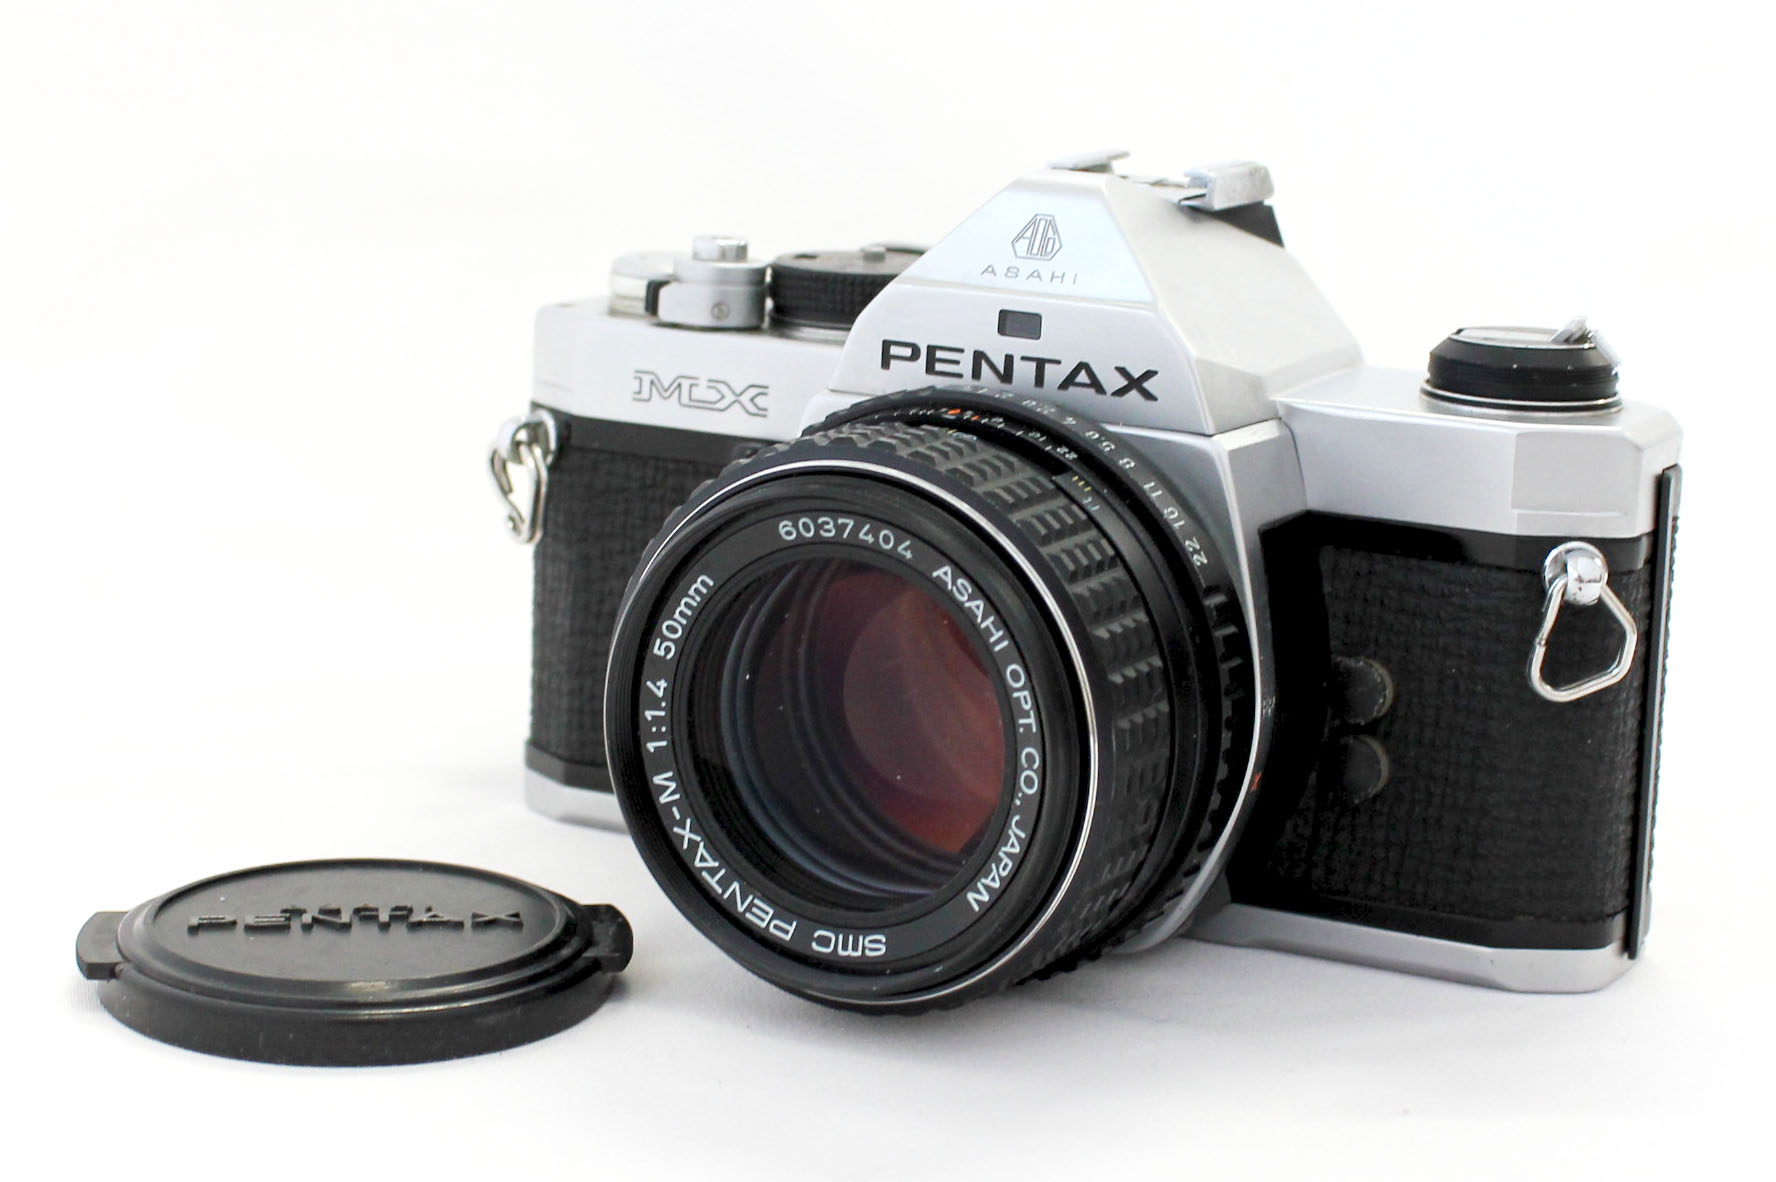 Japan Used Camera Shop | [Excellent++++] Pentax MX 35mm SLR Film Camera with SMC Pentax-M 50mm F/1.4 Lens from Japan